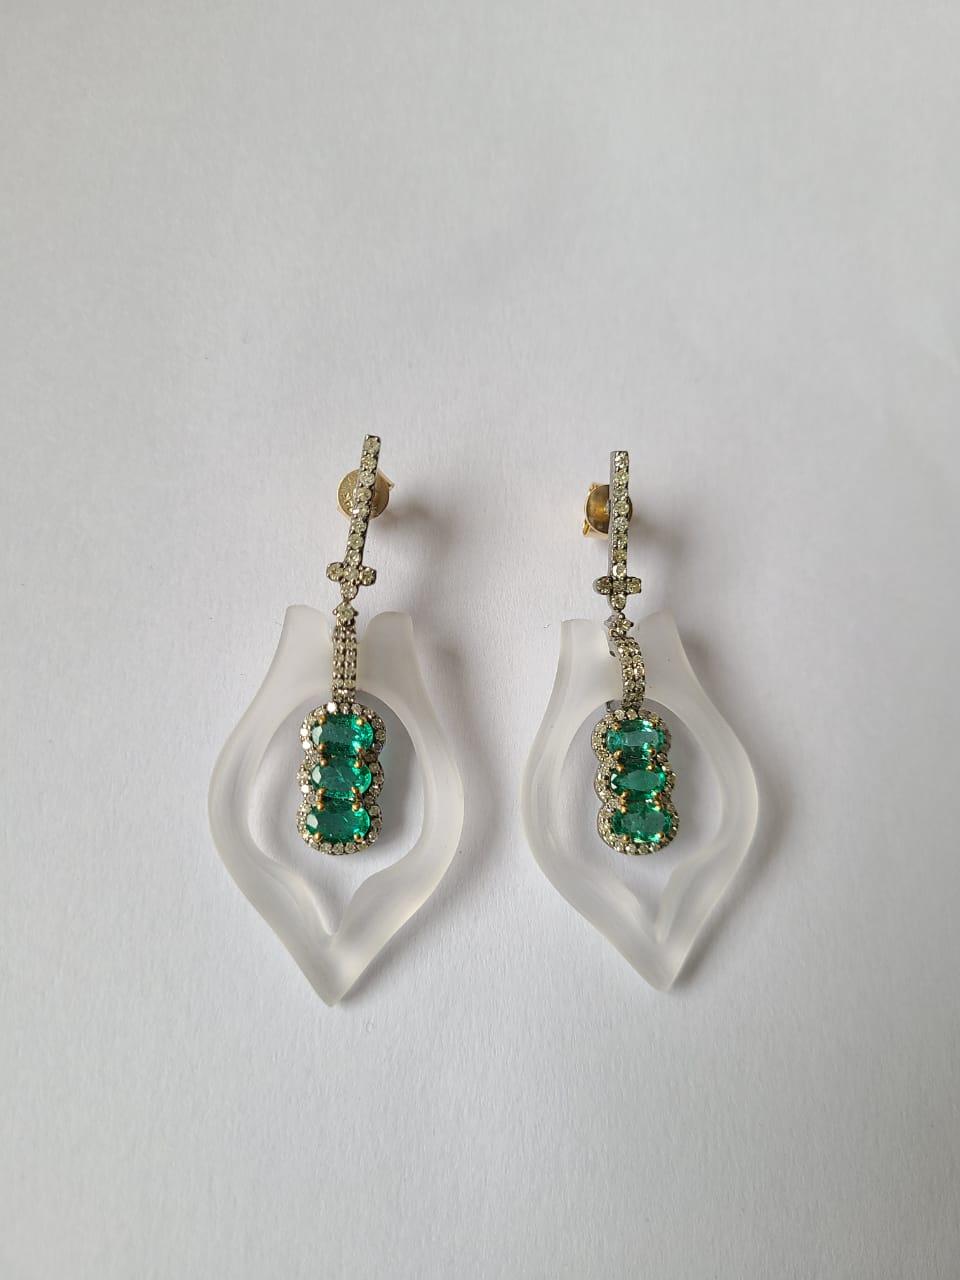 A very beautiful and one of a kind pair of Victorian style, Crystal, Emerald Dangle Earrings set in 14K Gold, Sil & Diamonds. The weight of the Crystal 38.57 carats. The weight of the Emeralds is 2.38 carats. The Emeralds are completely natural